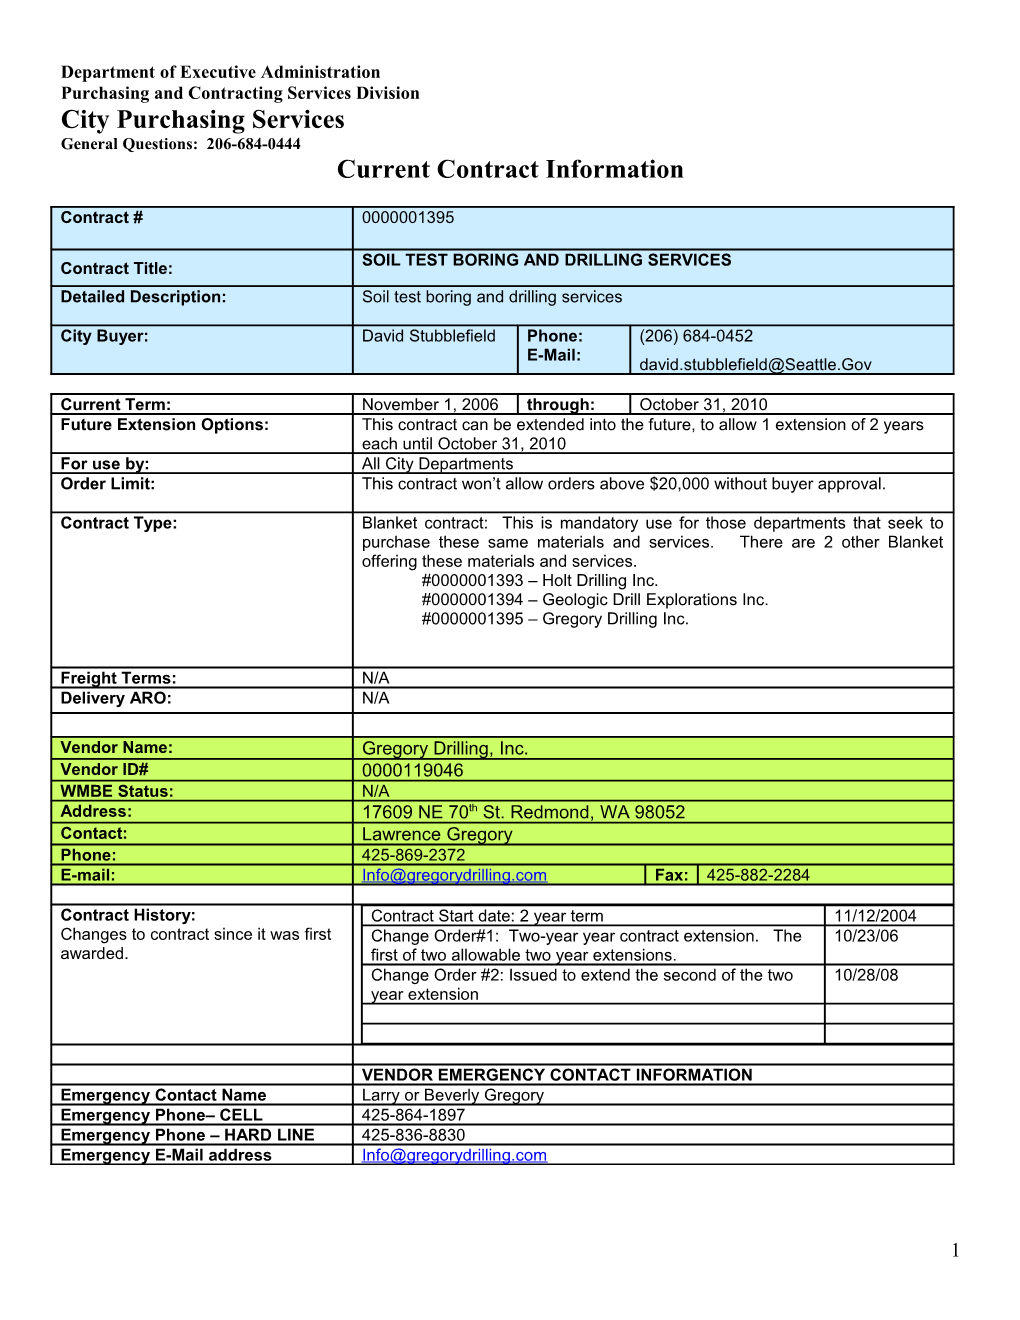 Current Contract Information Form s27